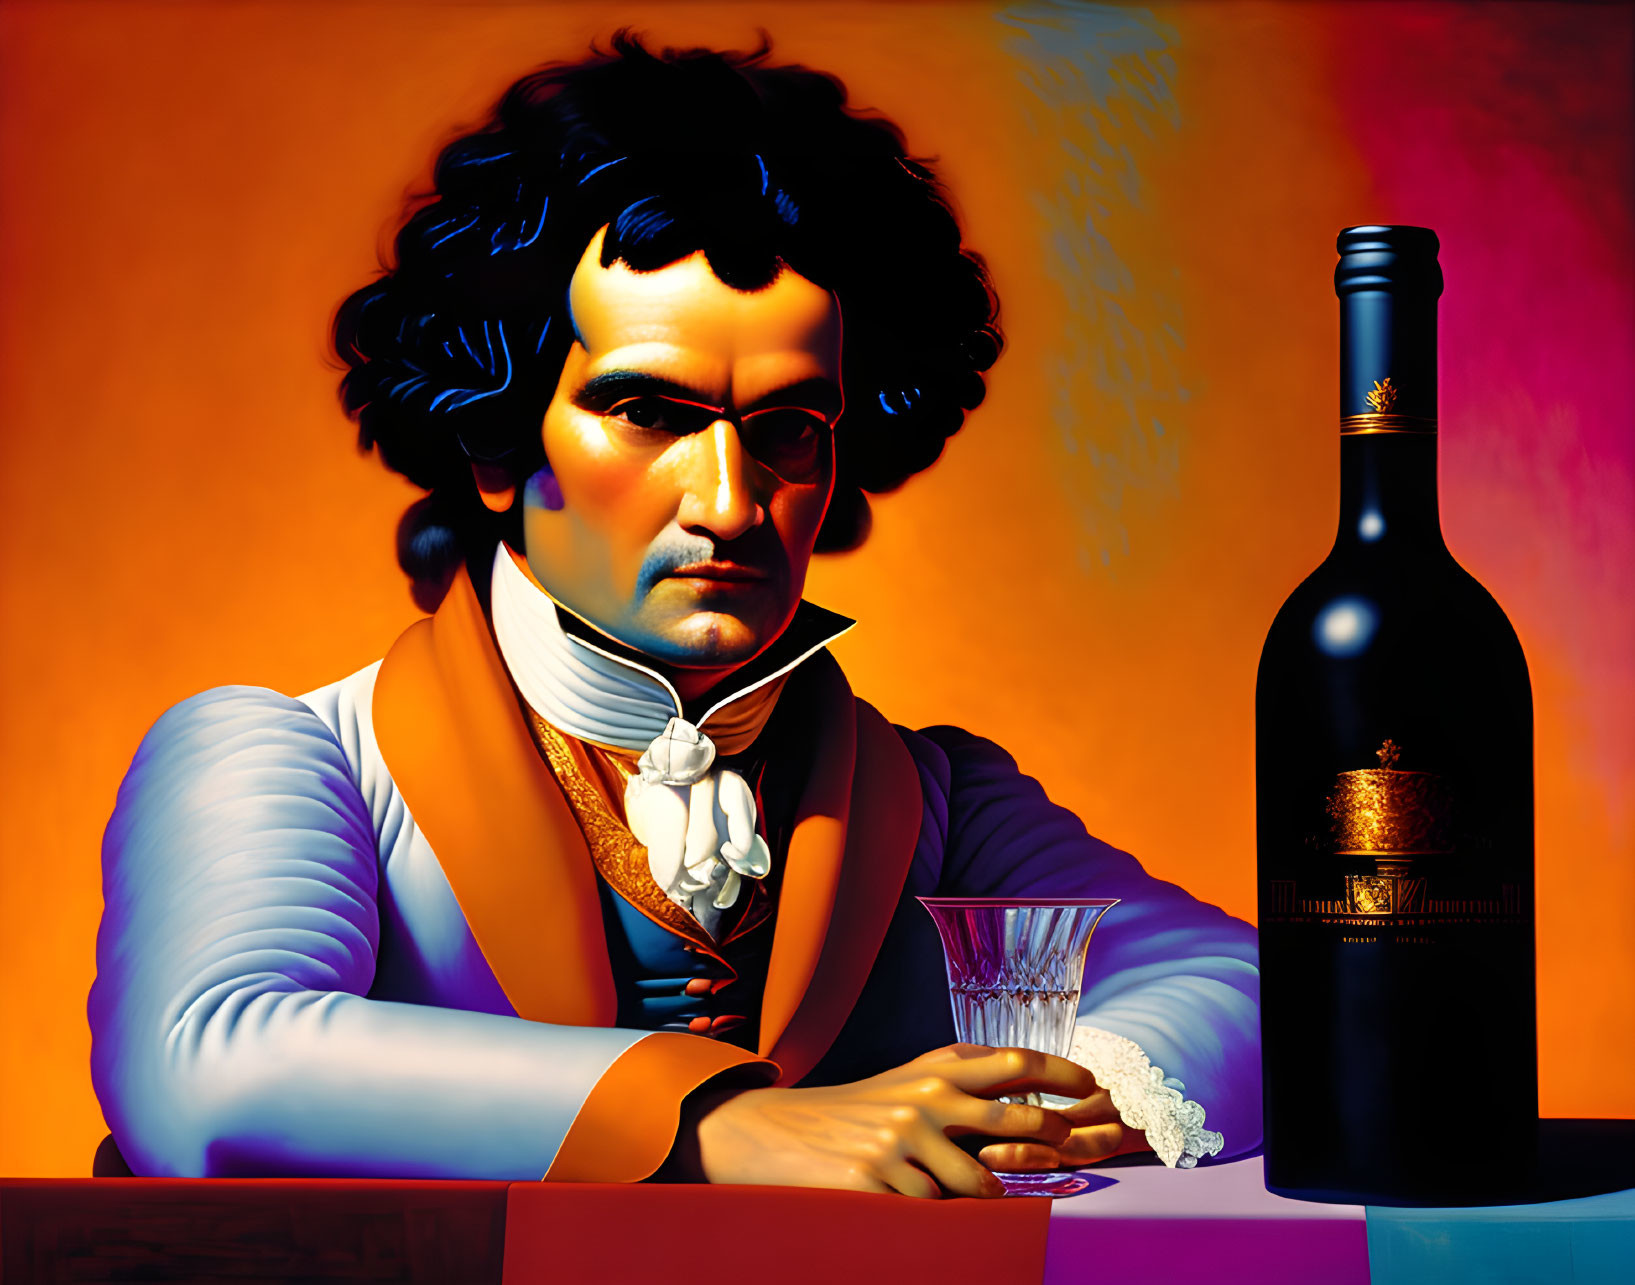 Colorful portrait of man with Beethoven-like hair, historical coat, wine bottle, and glass